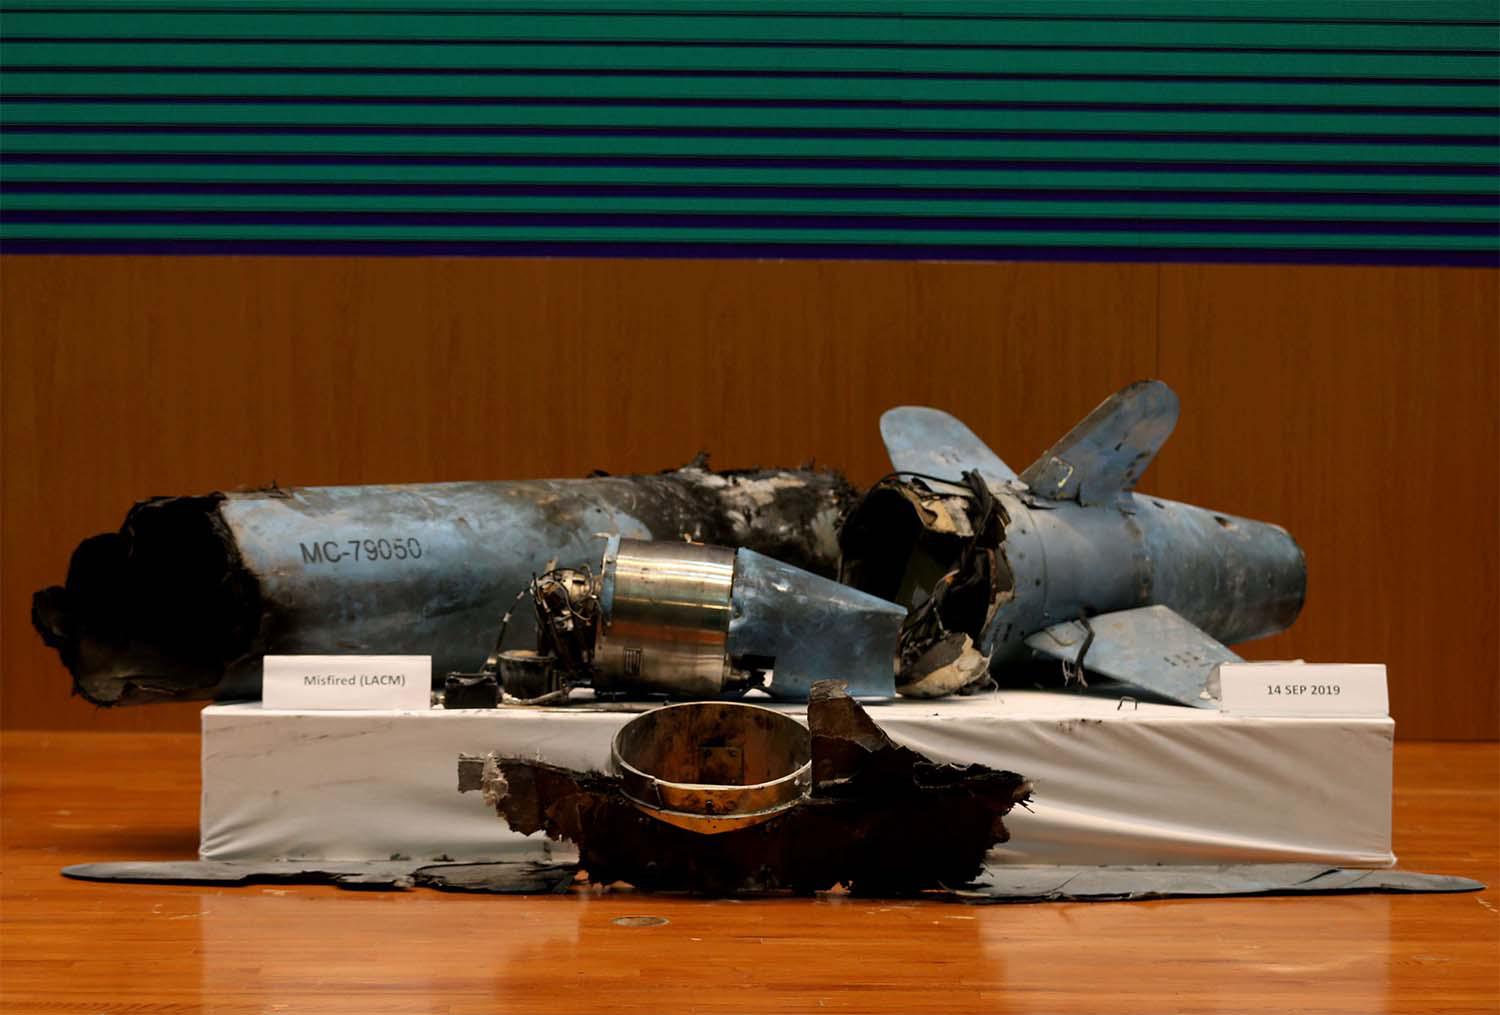 Remains of the missiles which Saudi government says were used to attack an Aramco oil facility last year